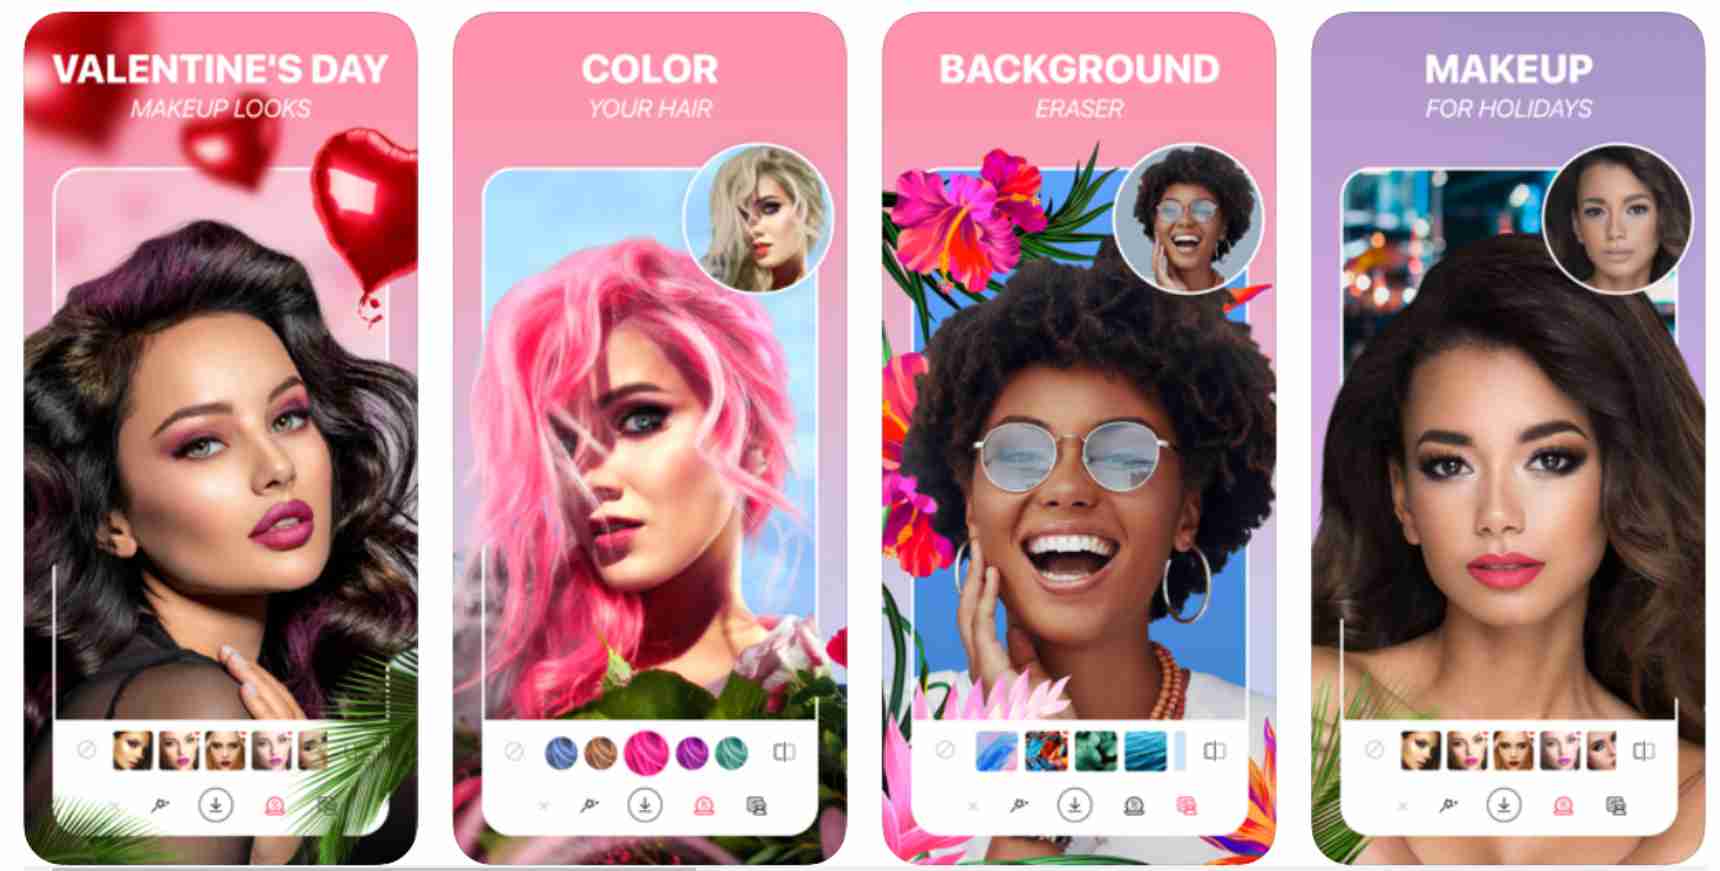 hair color virtual try on app